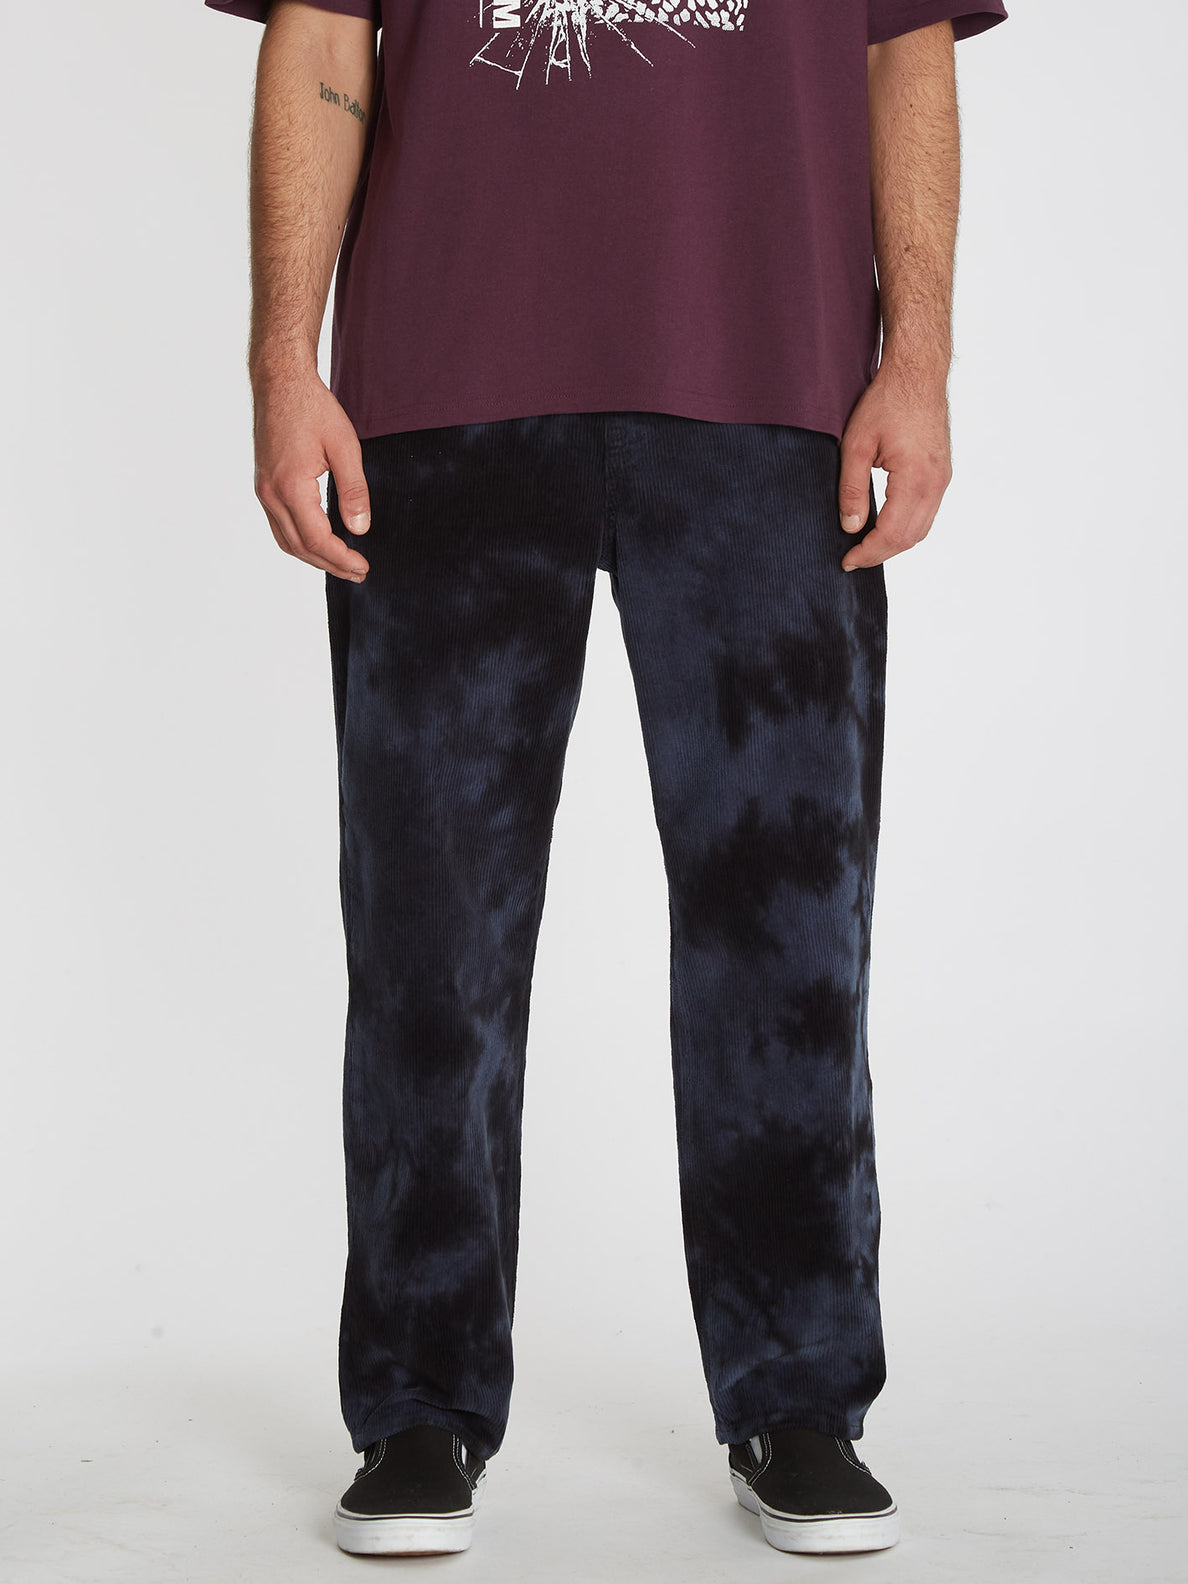 Outer Spaced Corduroy Trousers - TIE DYE (A1232205_TDY) [F]